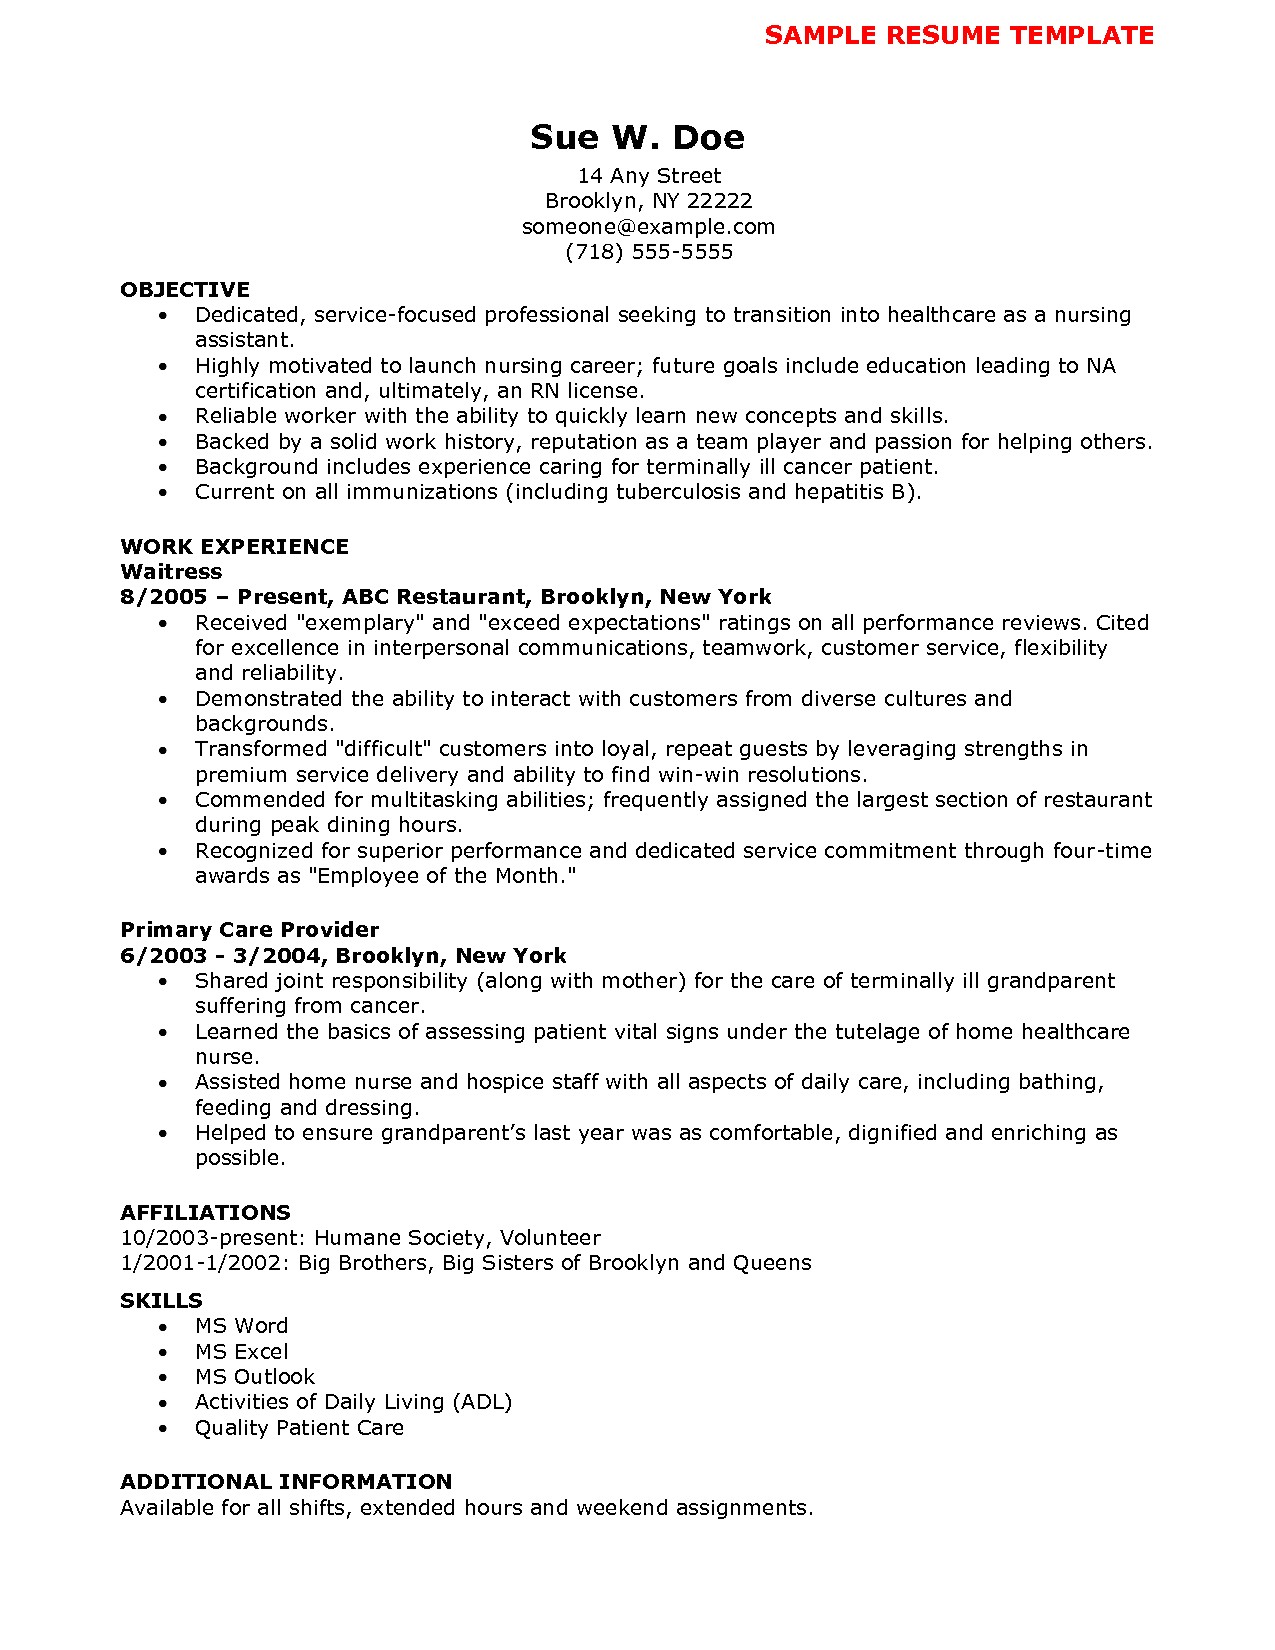 resume objective for cna